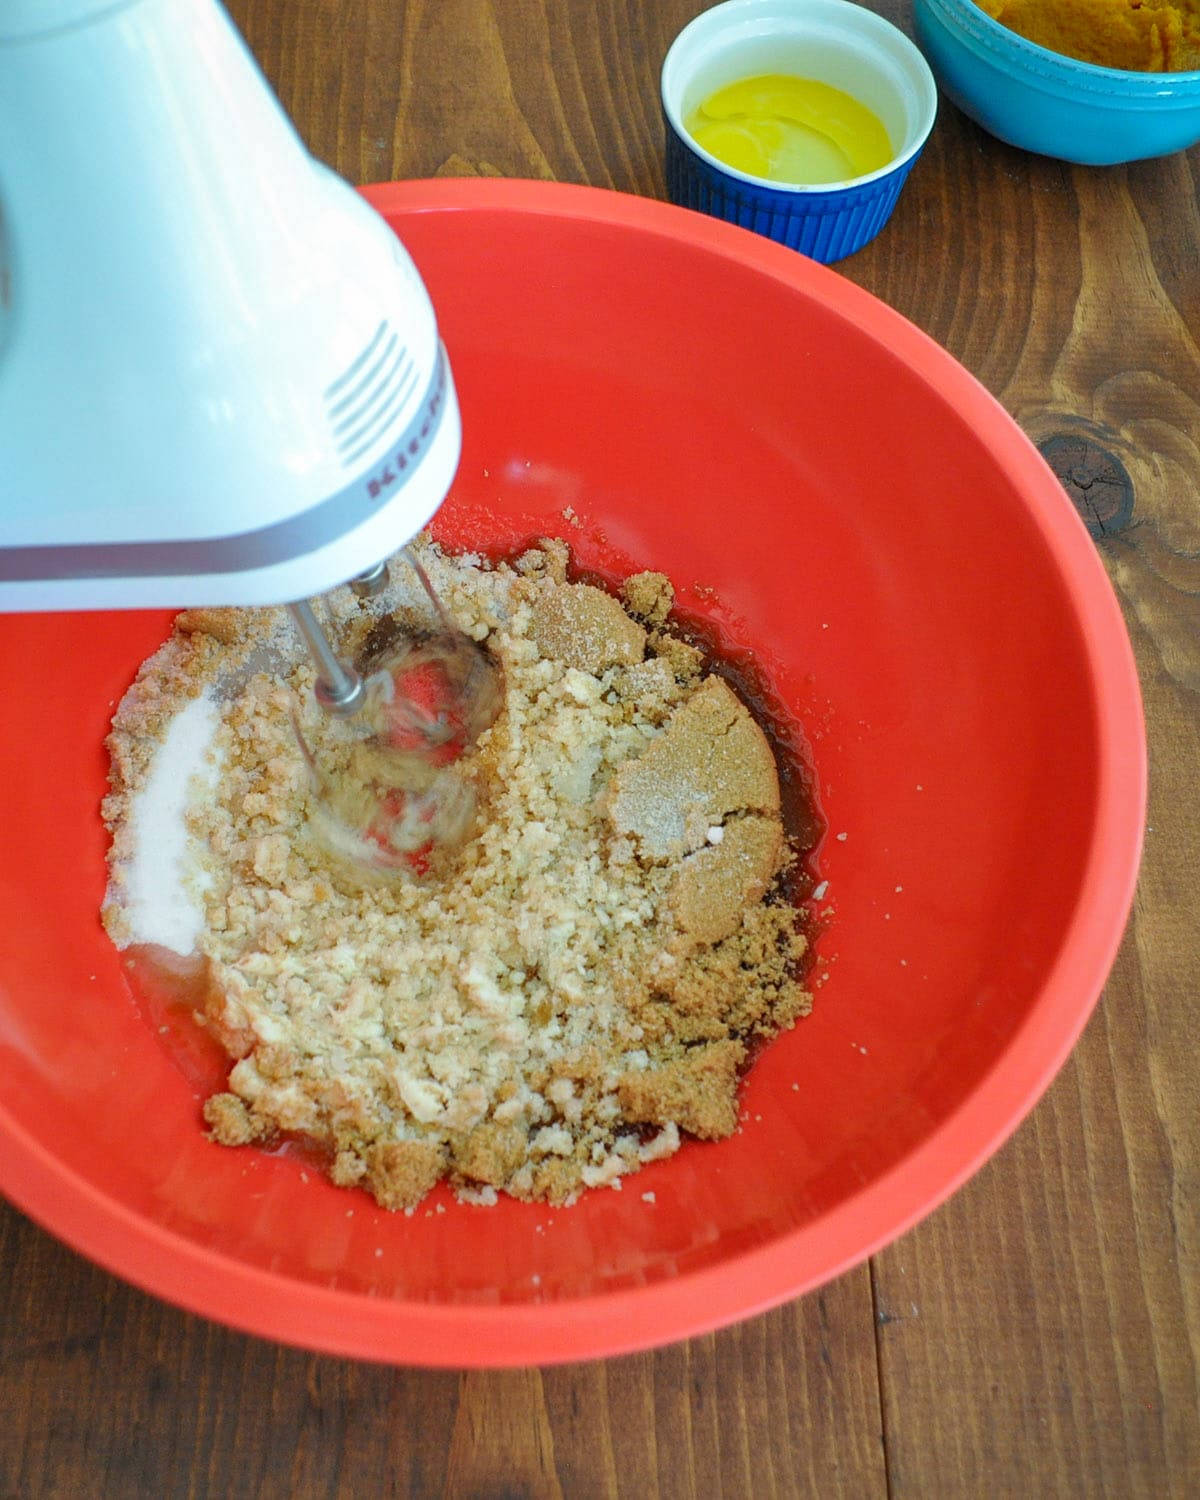 brown and white sugars being beaten with an electric mixer in a large red bowl 